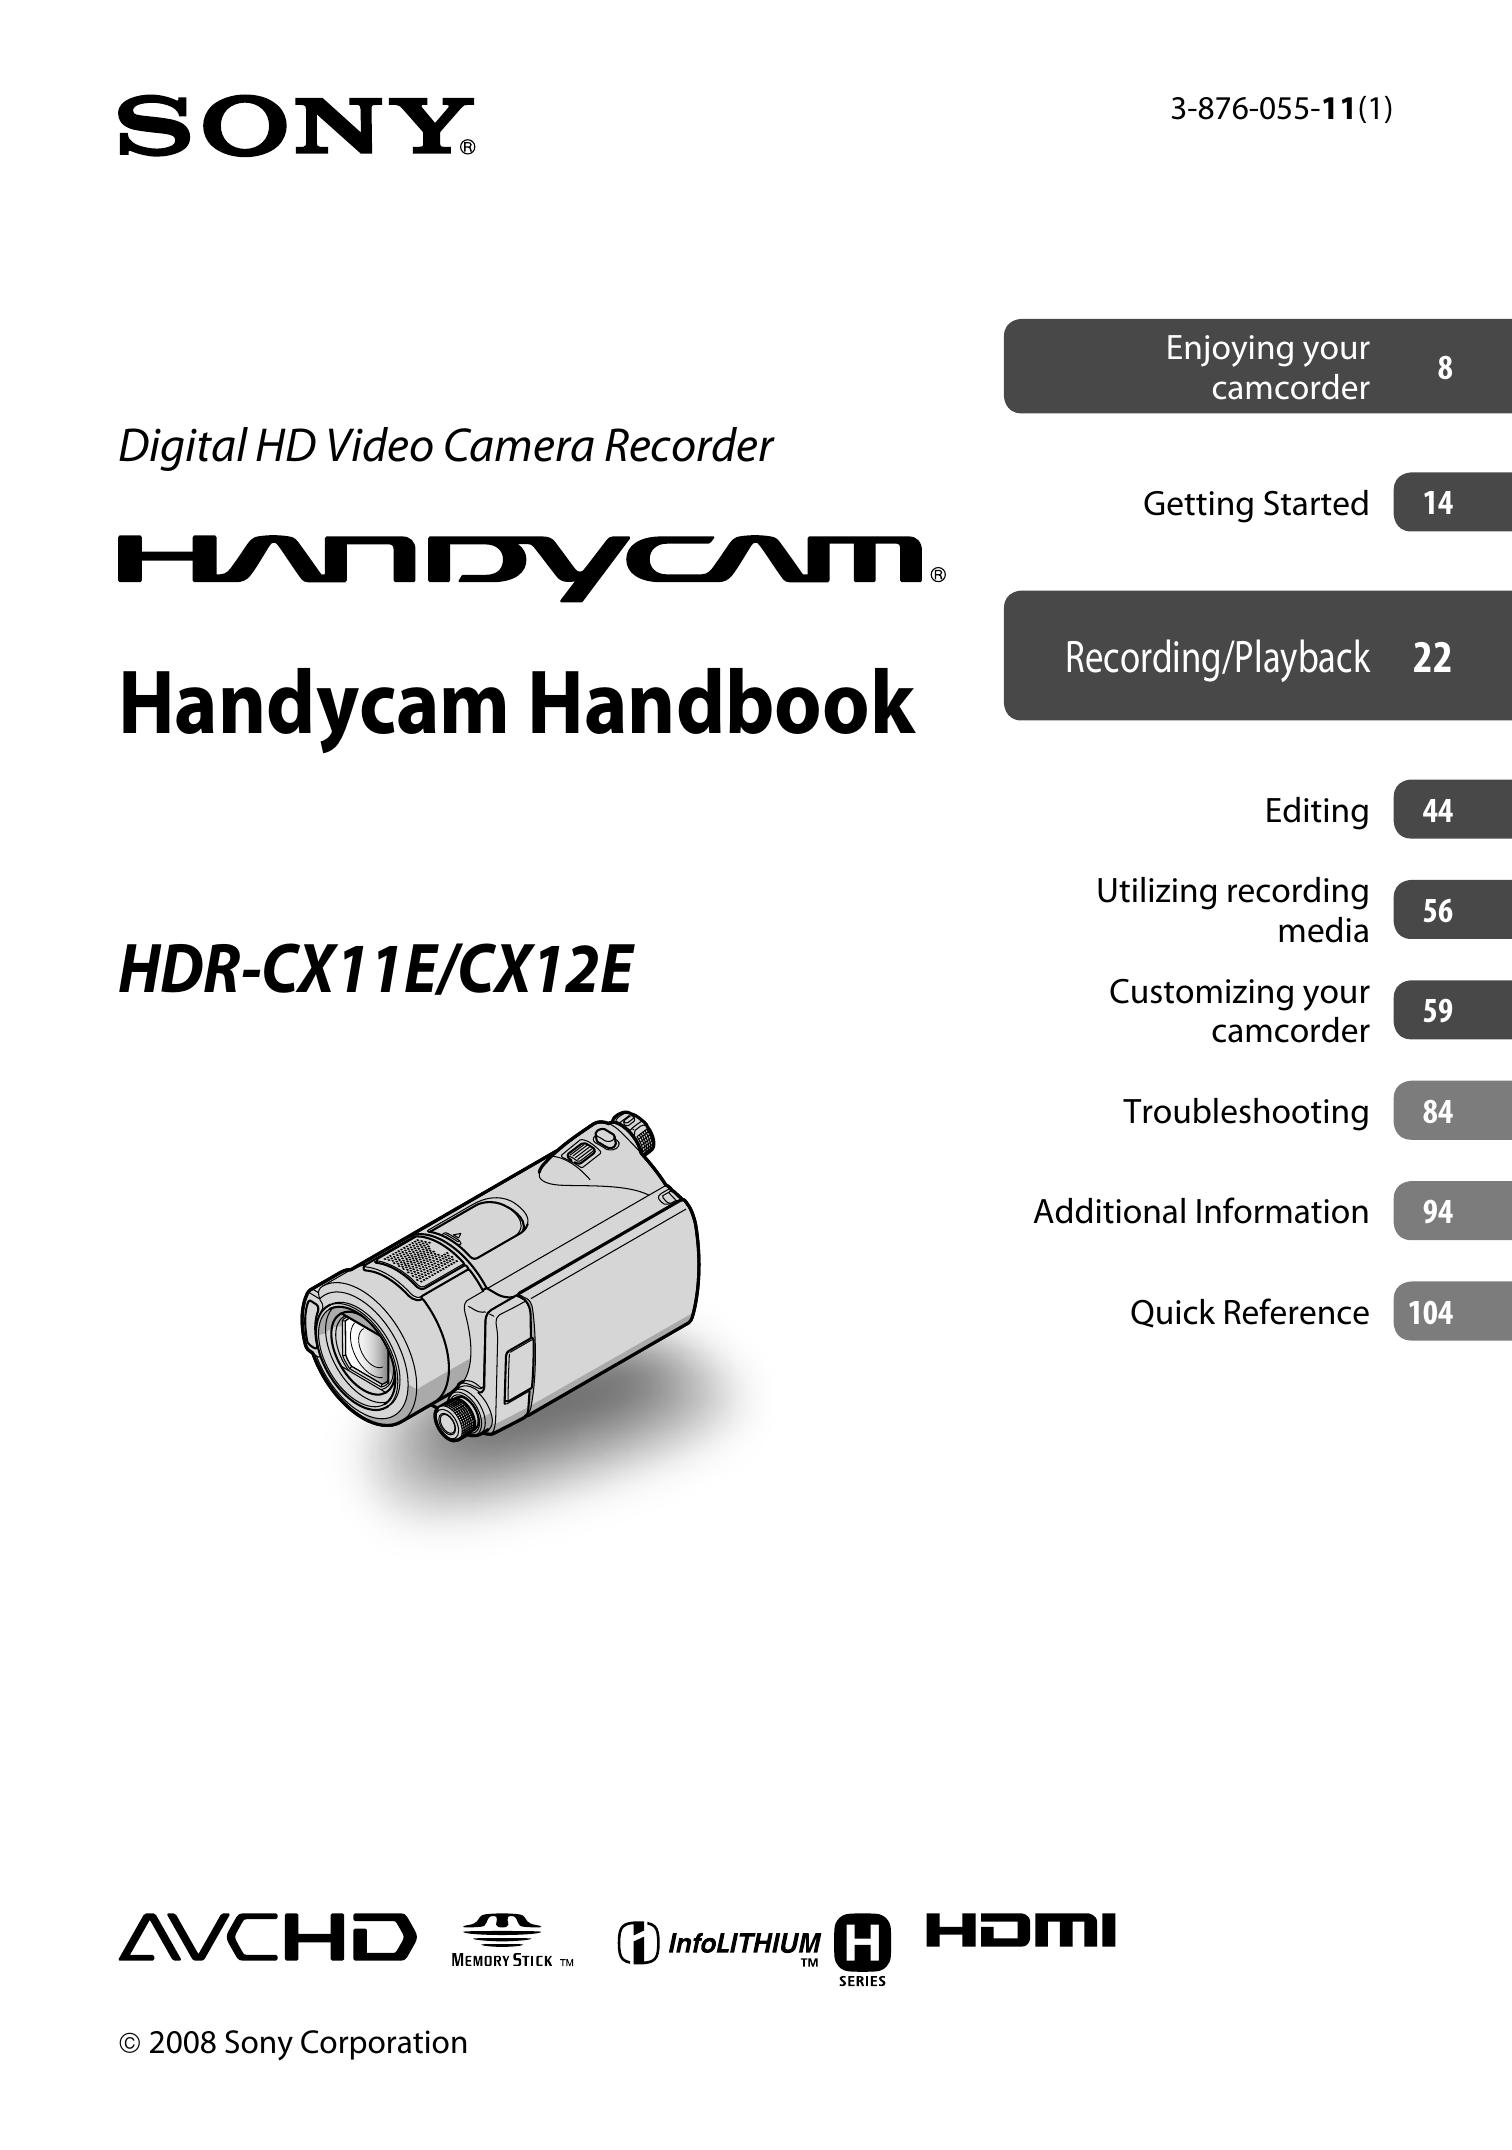 Sony 3-876-055-11(1) Camcorder User Manual